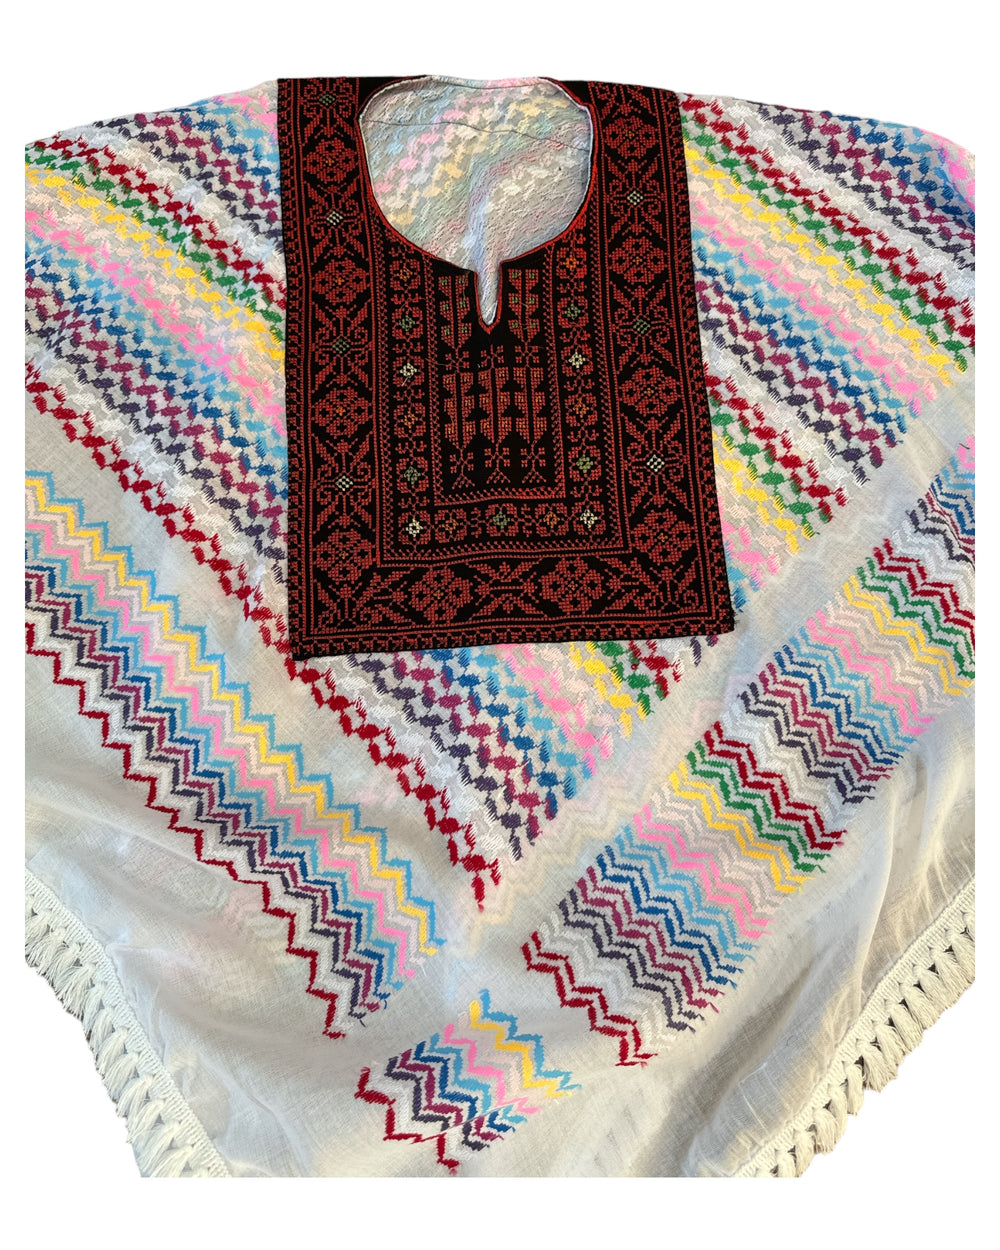 Hand Stitched White & Multi-Coloured Poncho with Keffiyeh design and Embroidery